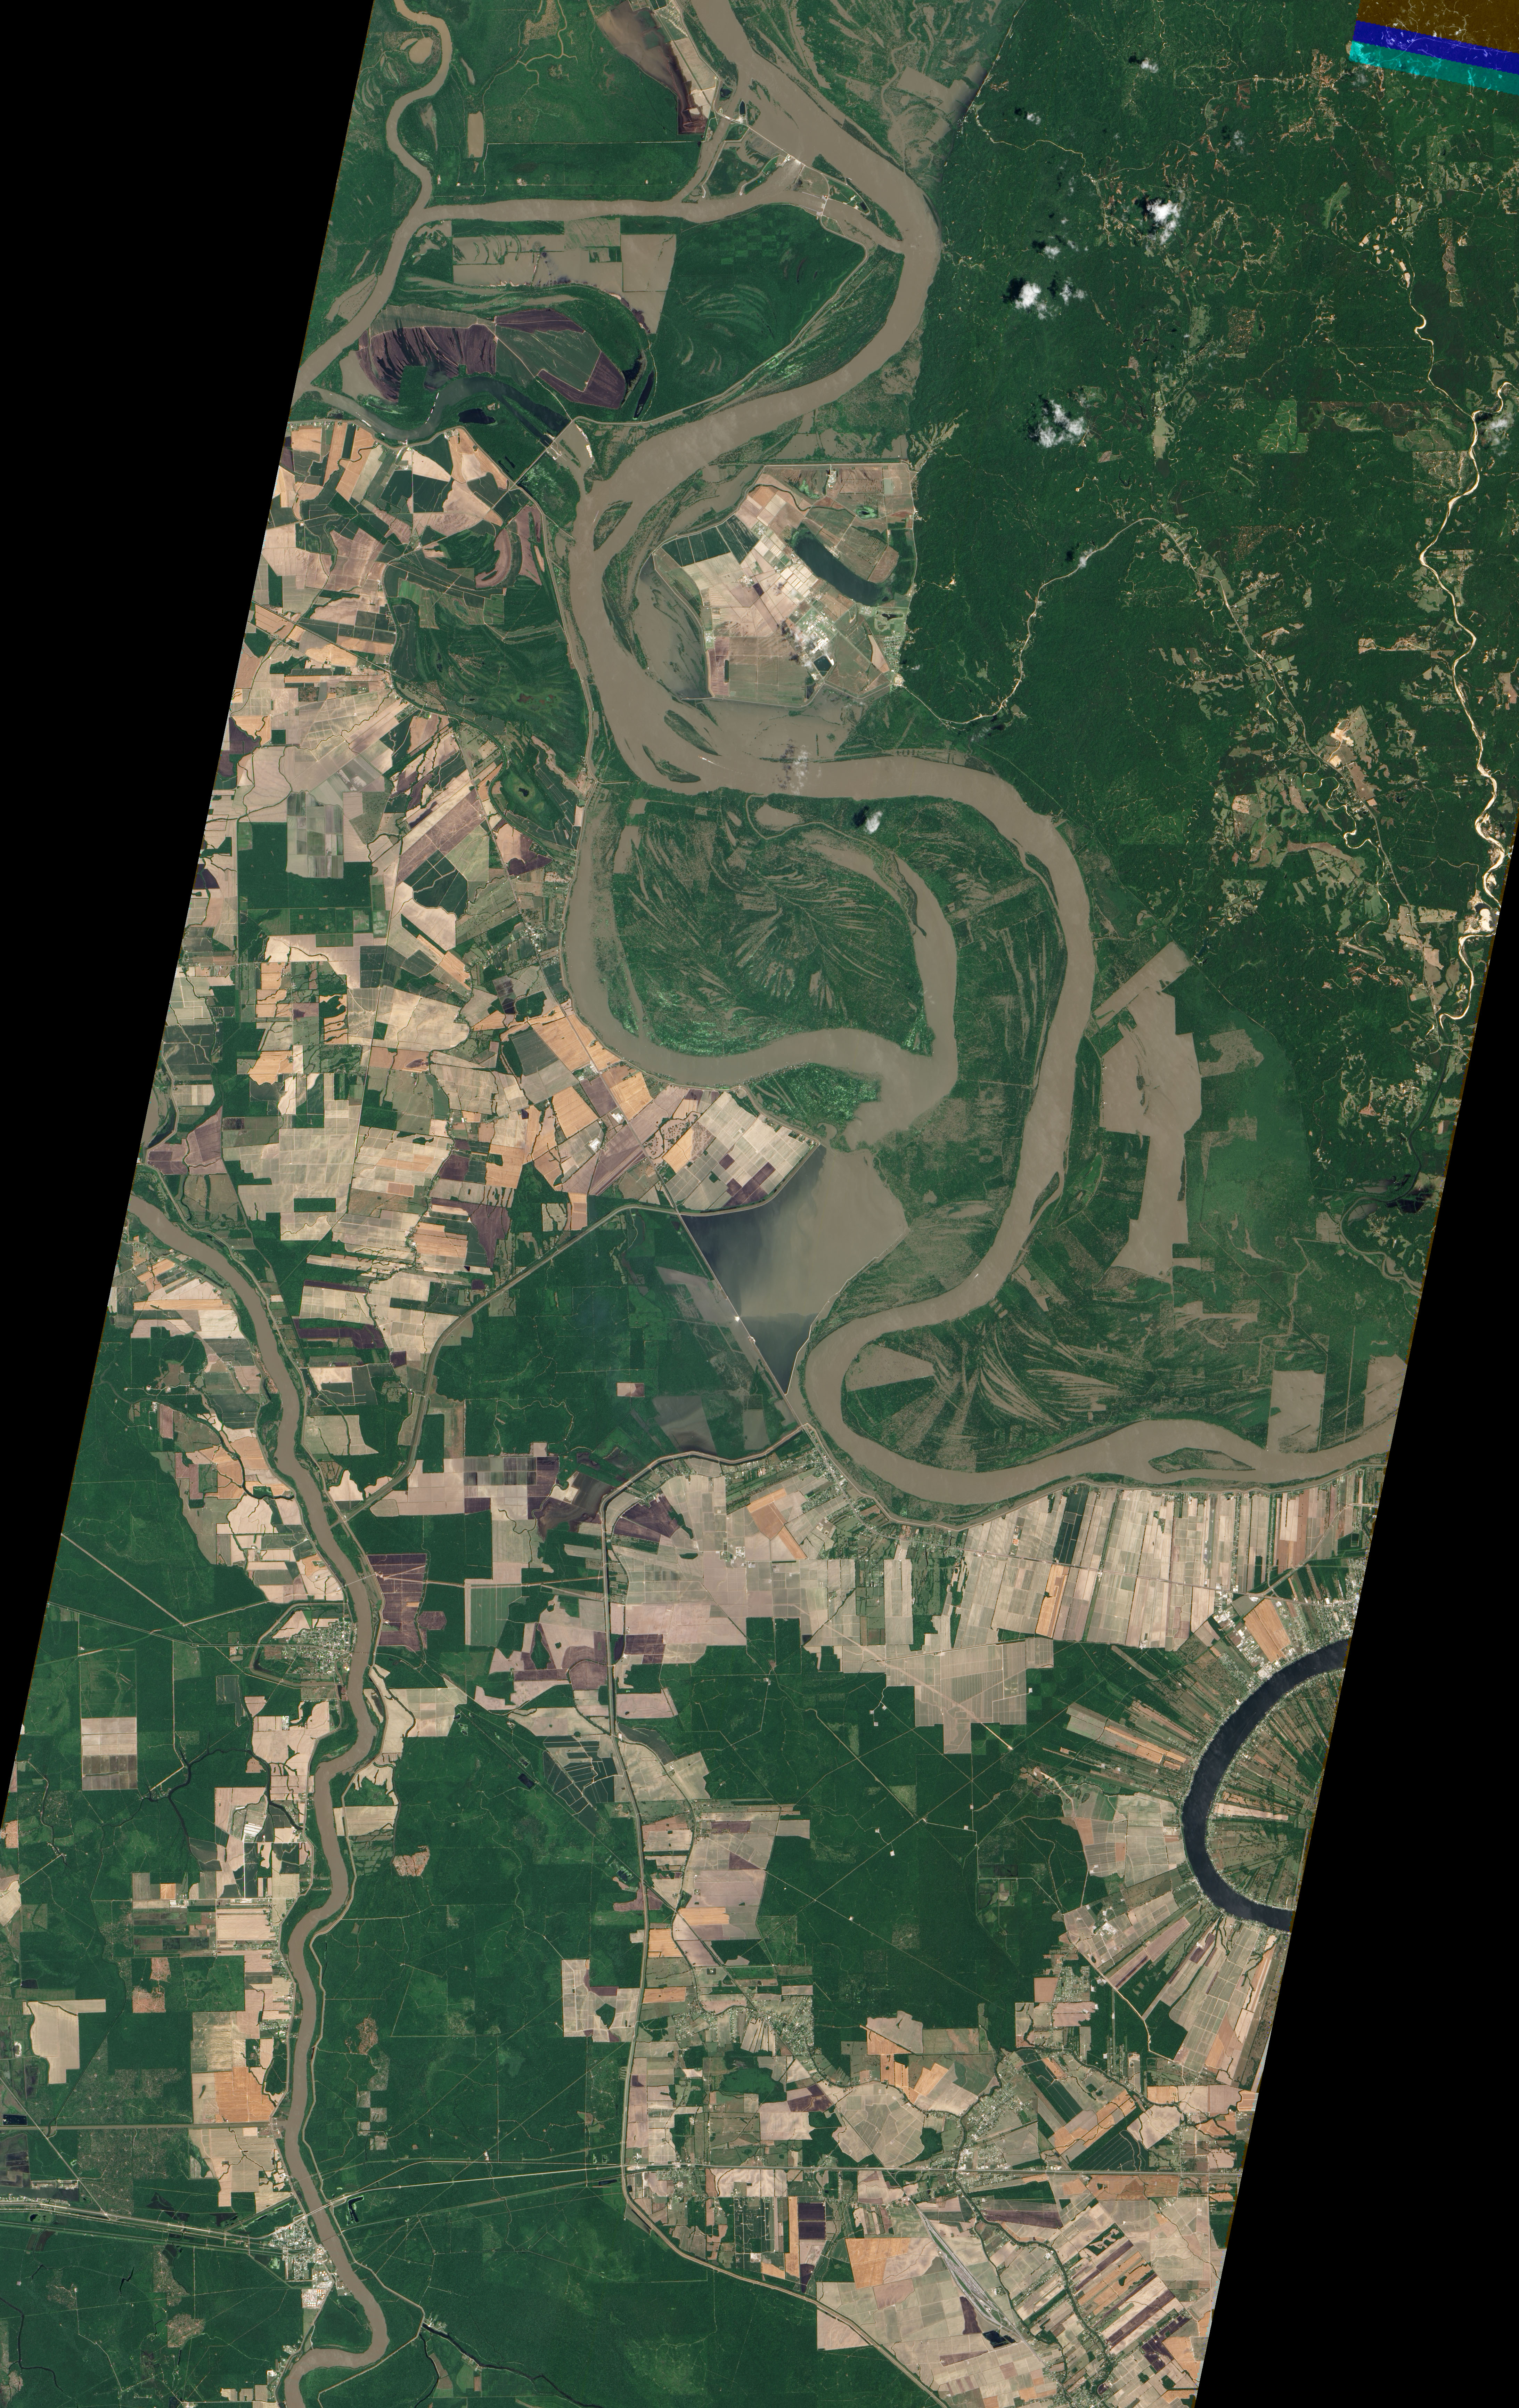 Morganza Spillway Opens in Louisiana - related image preview